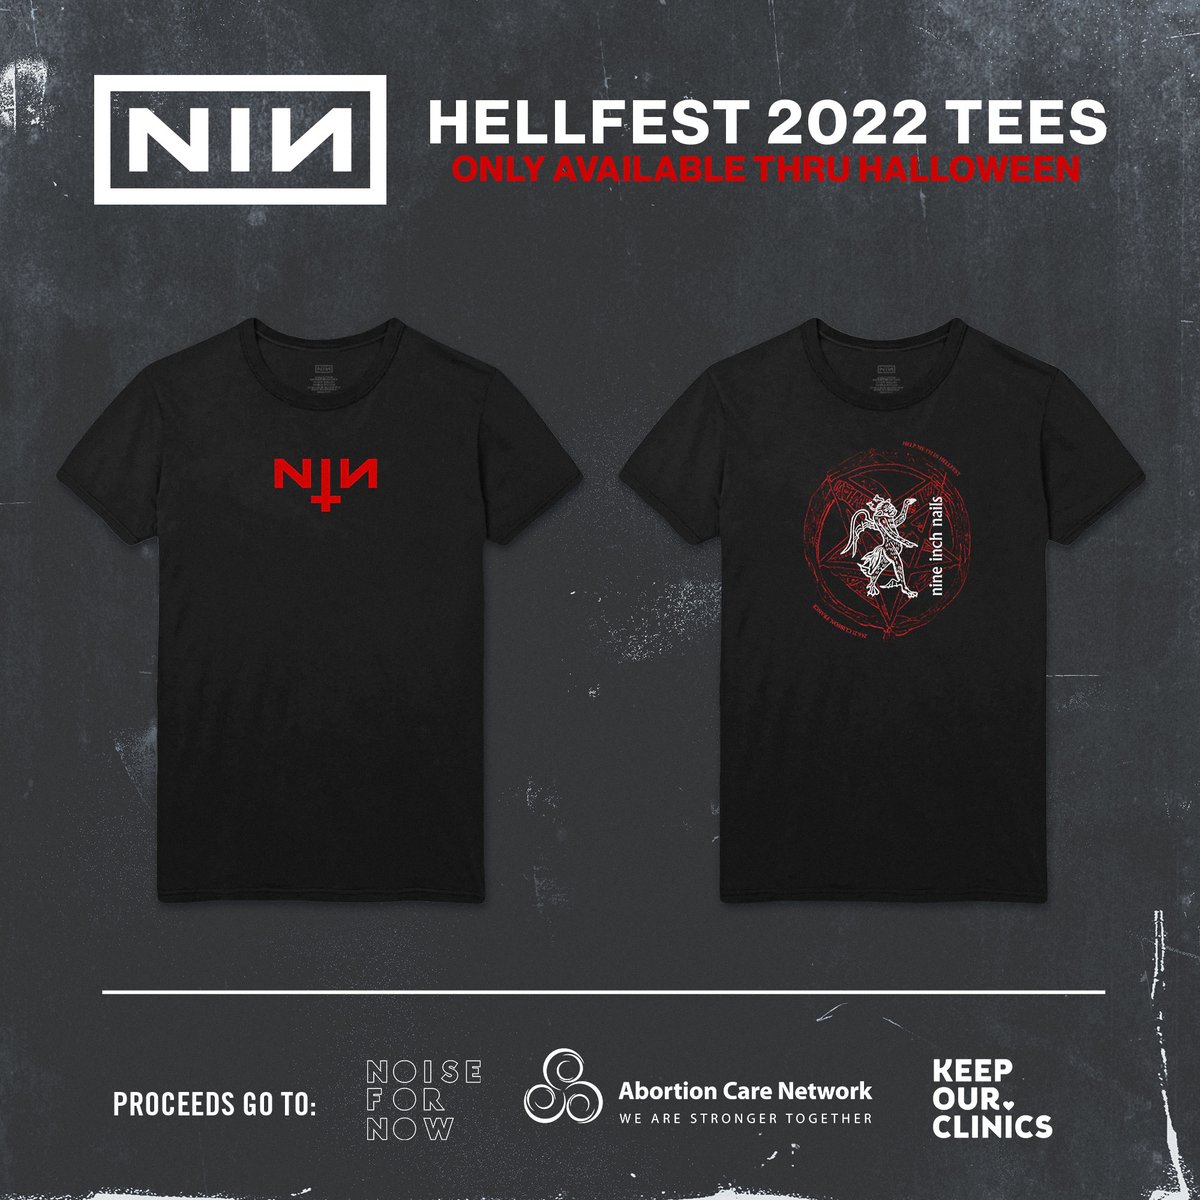 NINE INCH NAILS HELLFEST SHIRTS AVAILABLE NOW All proceeds go to @NoiseForNow/@AbortionCare’s @KeepOurClinics Fund These shirts are limited and only available now through Halloween at NIN.com.